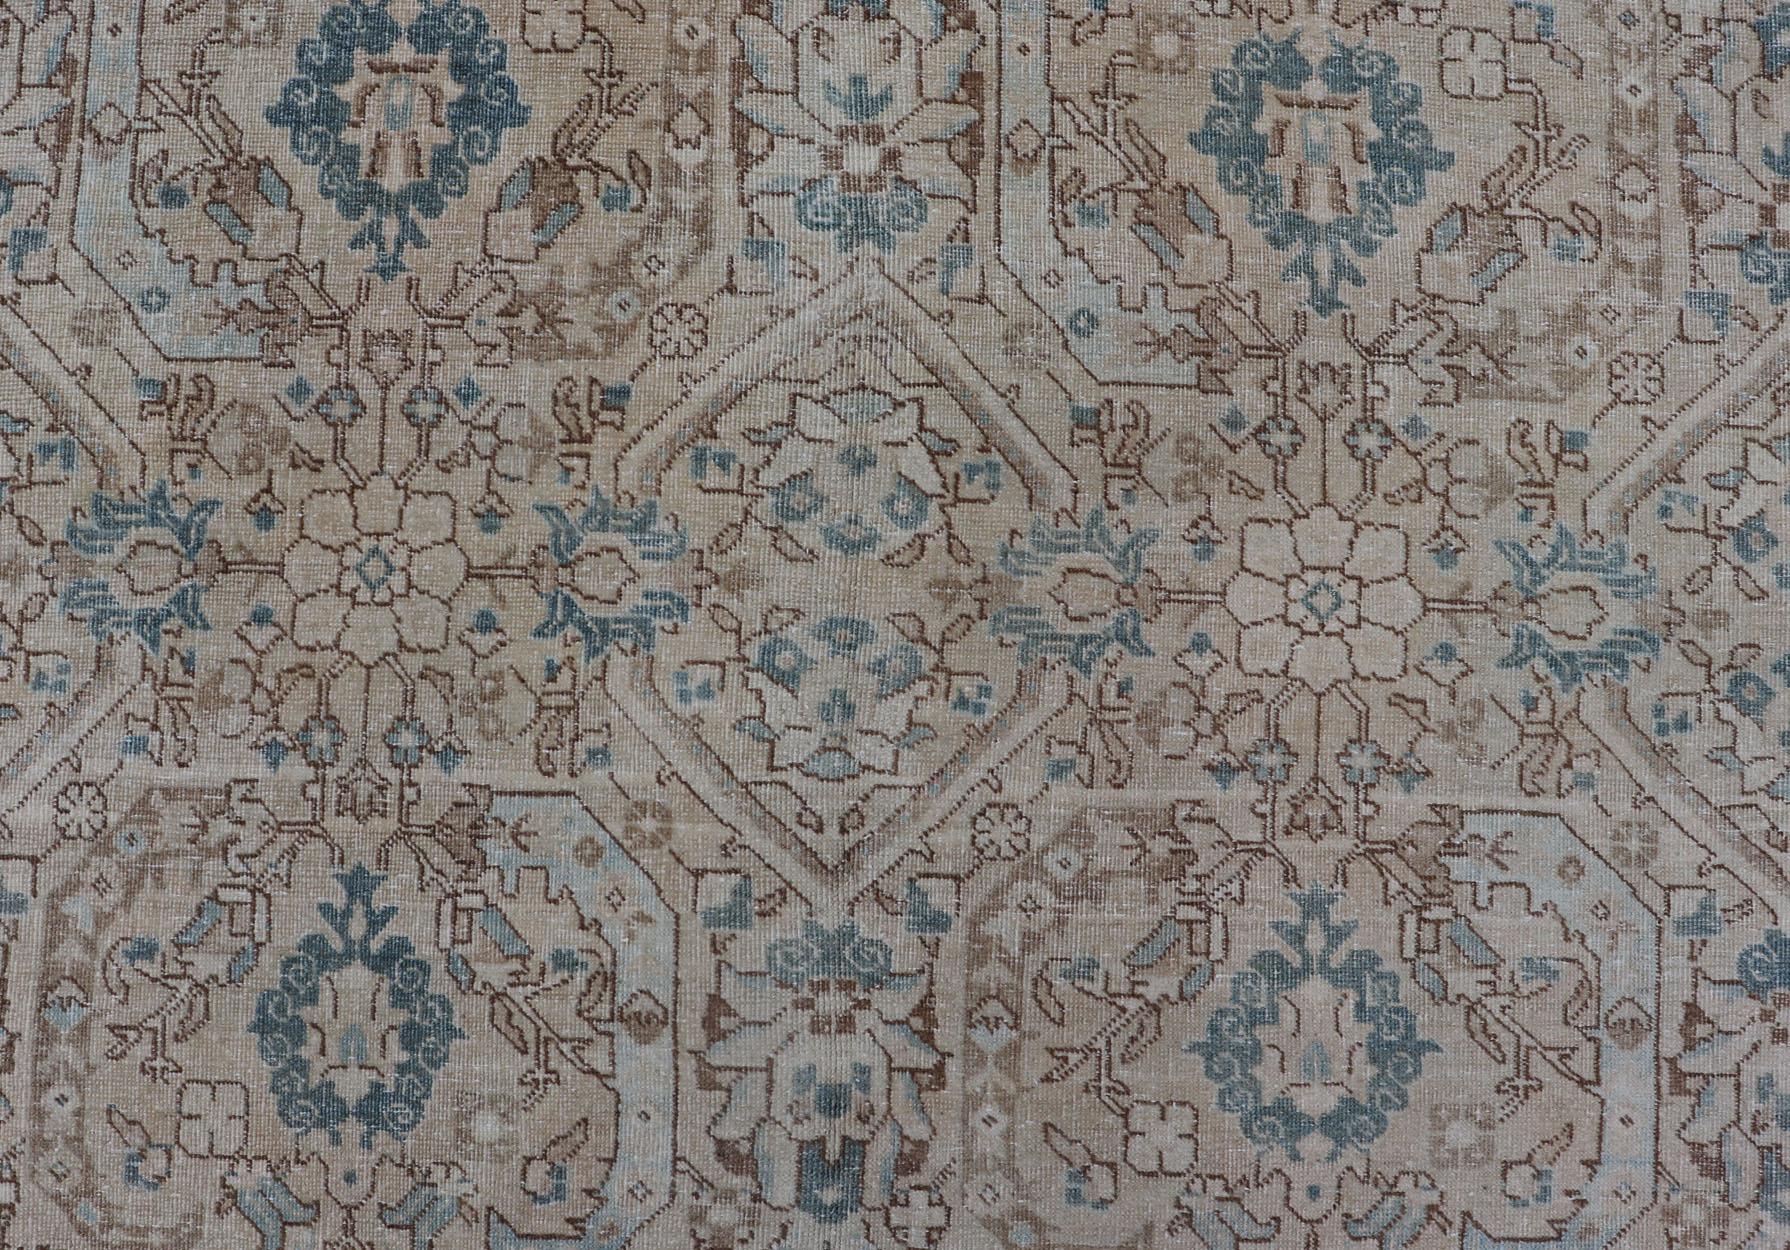 Blue, Brown and Tan Persian Antique Tabriz Rug with All-Over Geometric Design For Sale 2